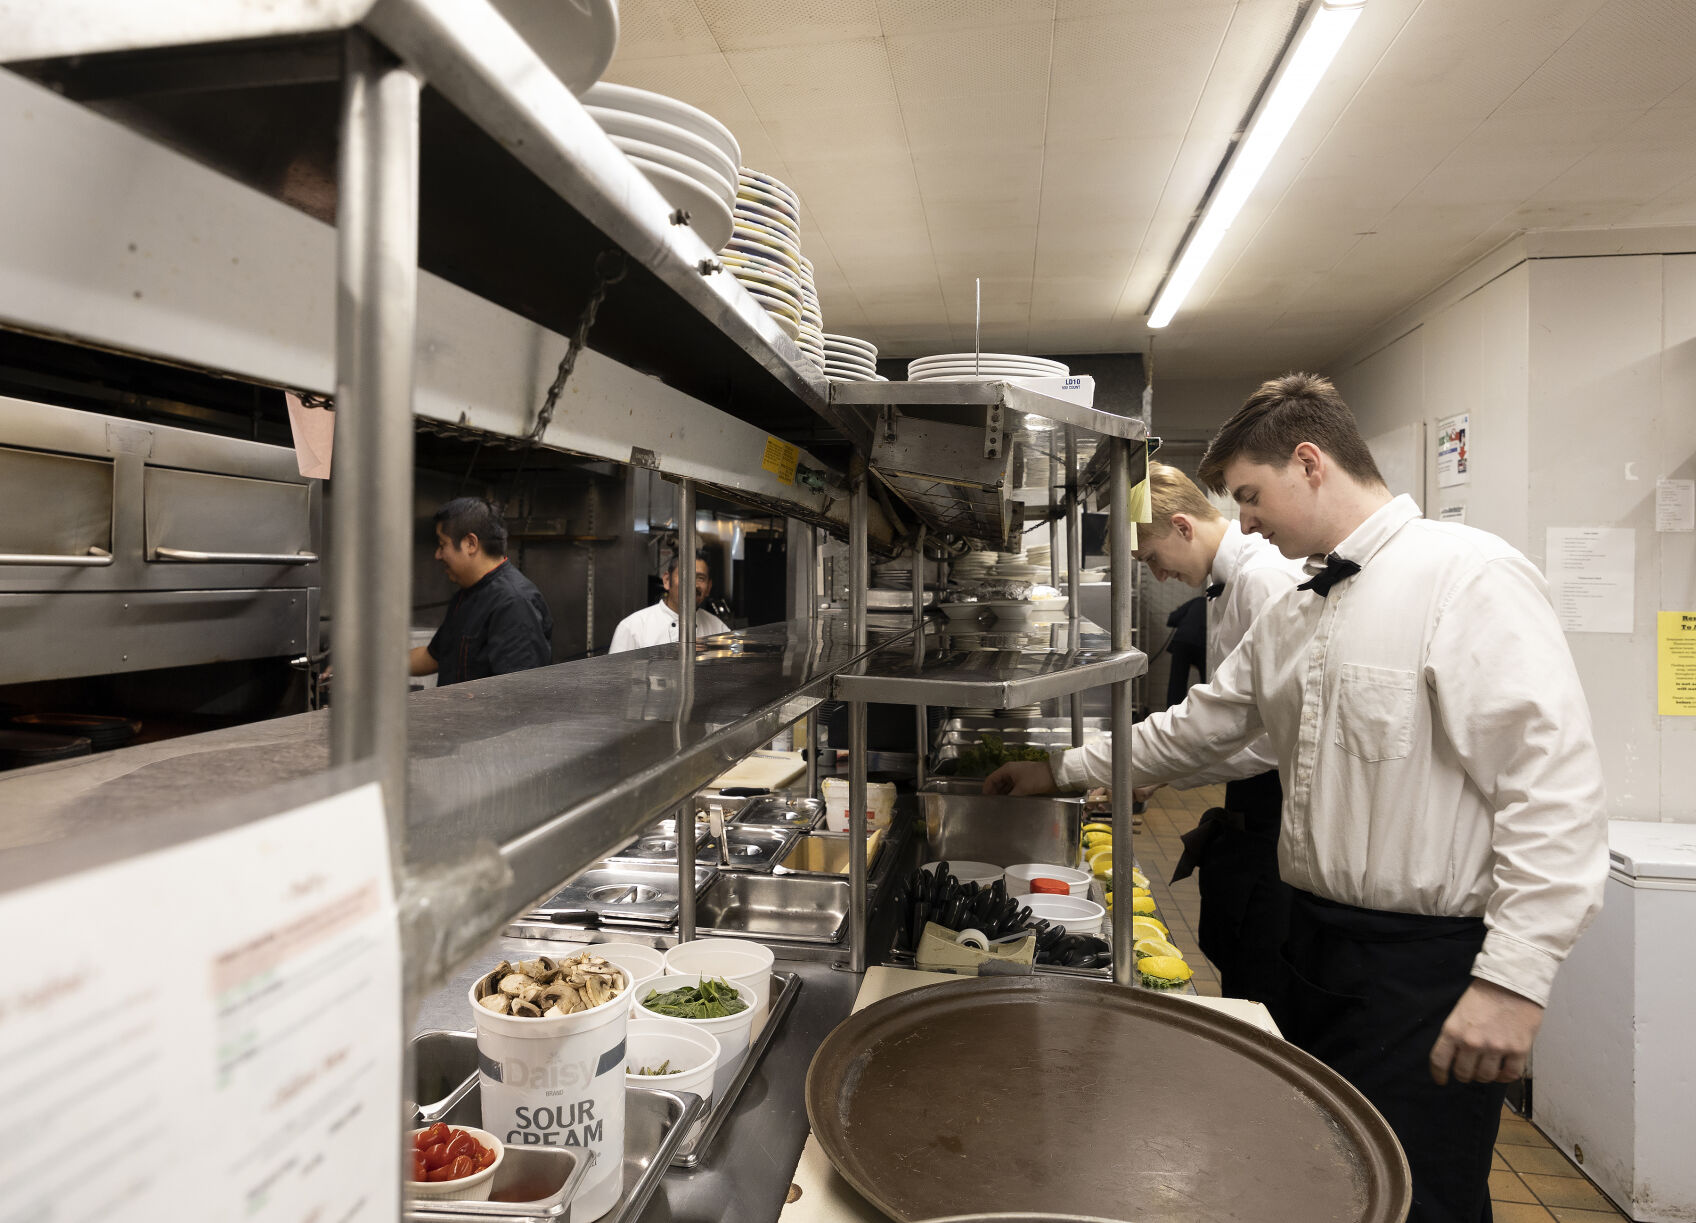 The kitchen at Timmerman